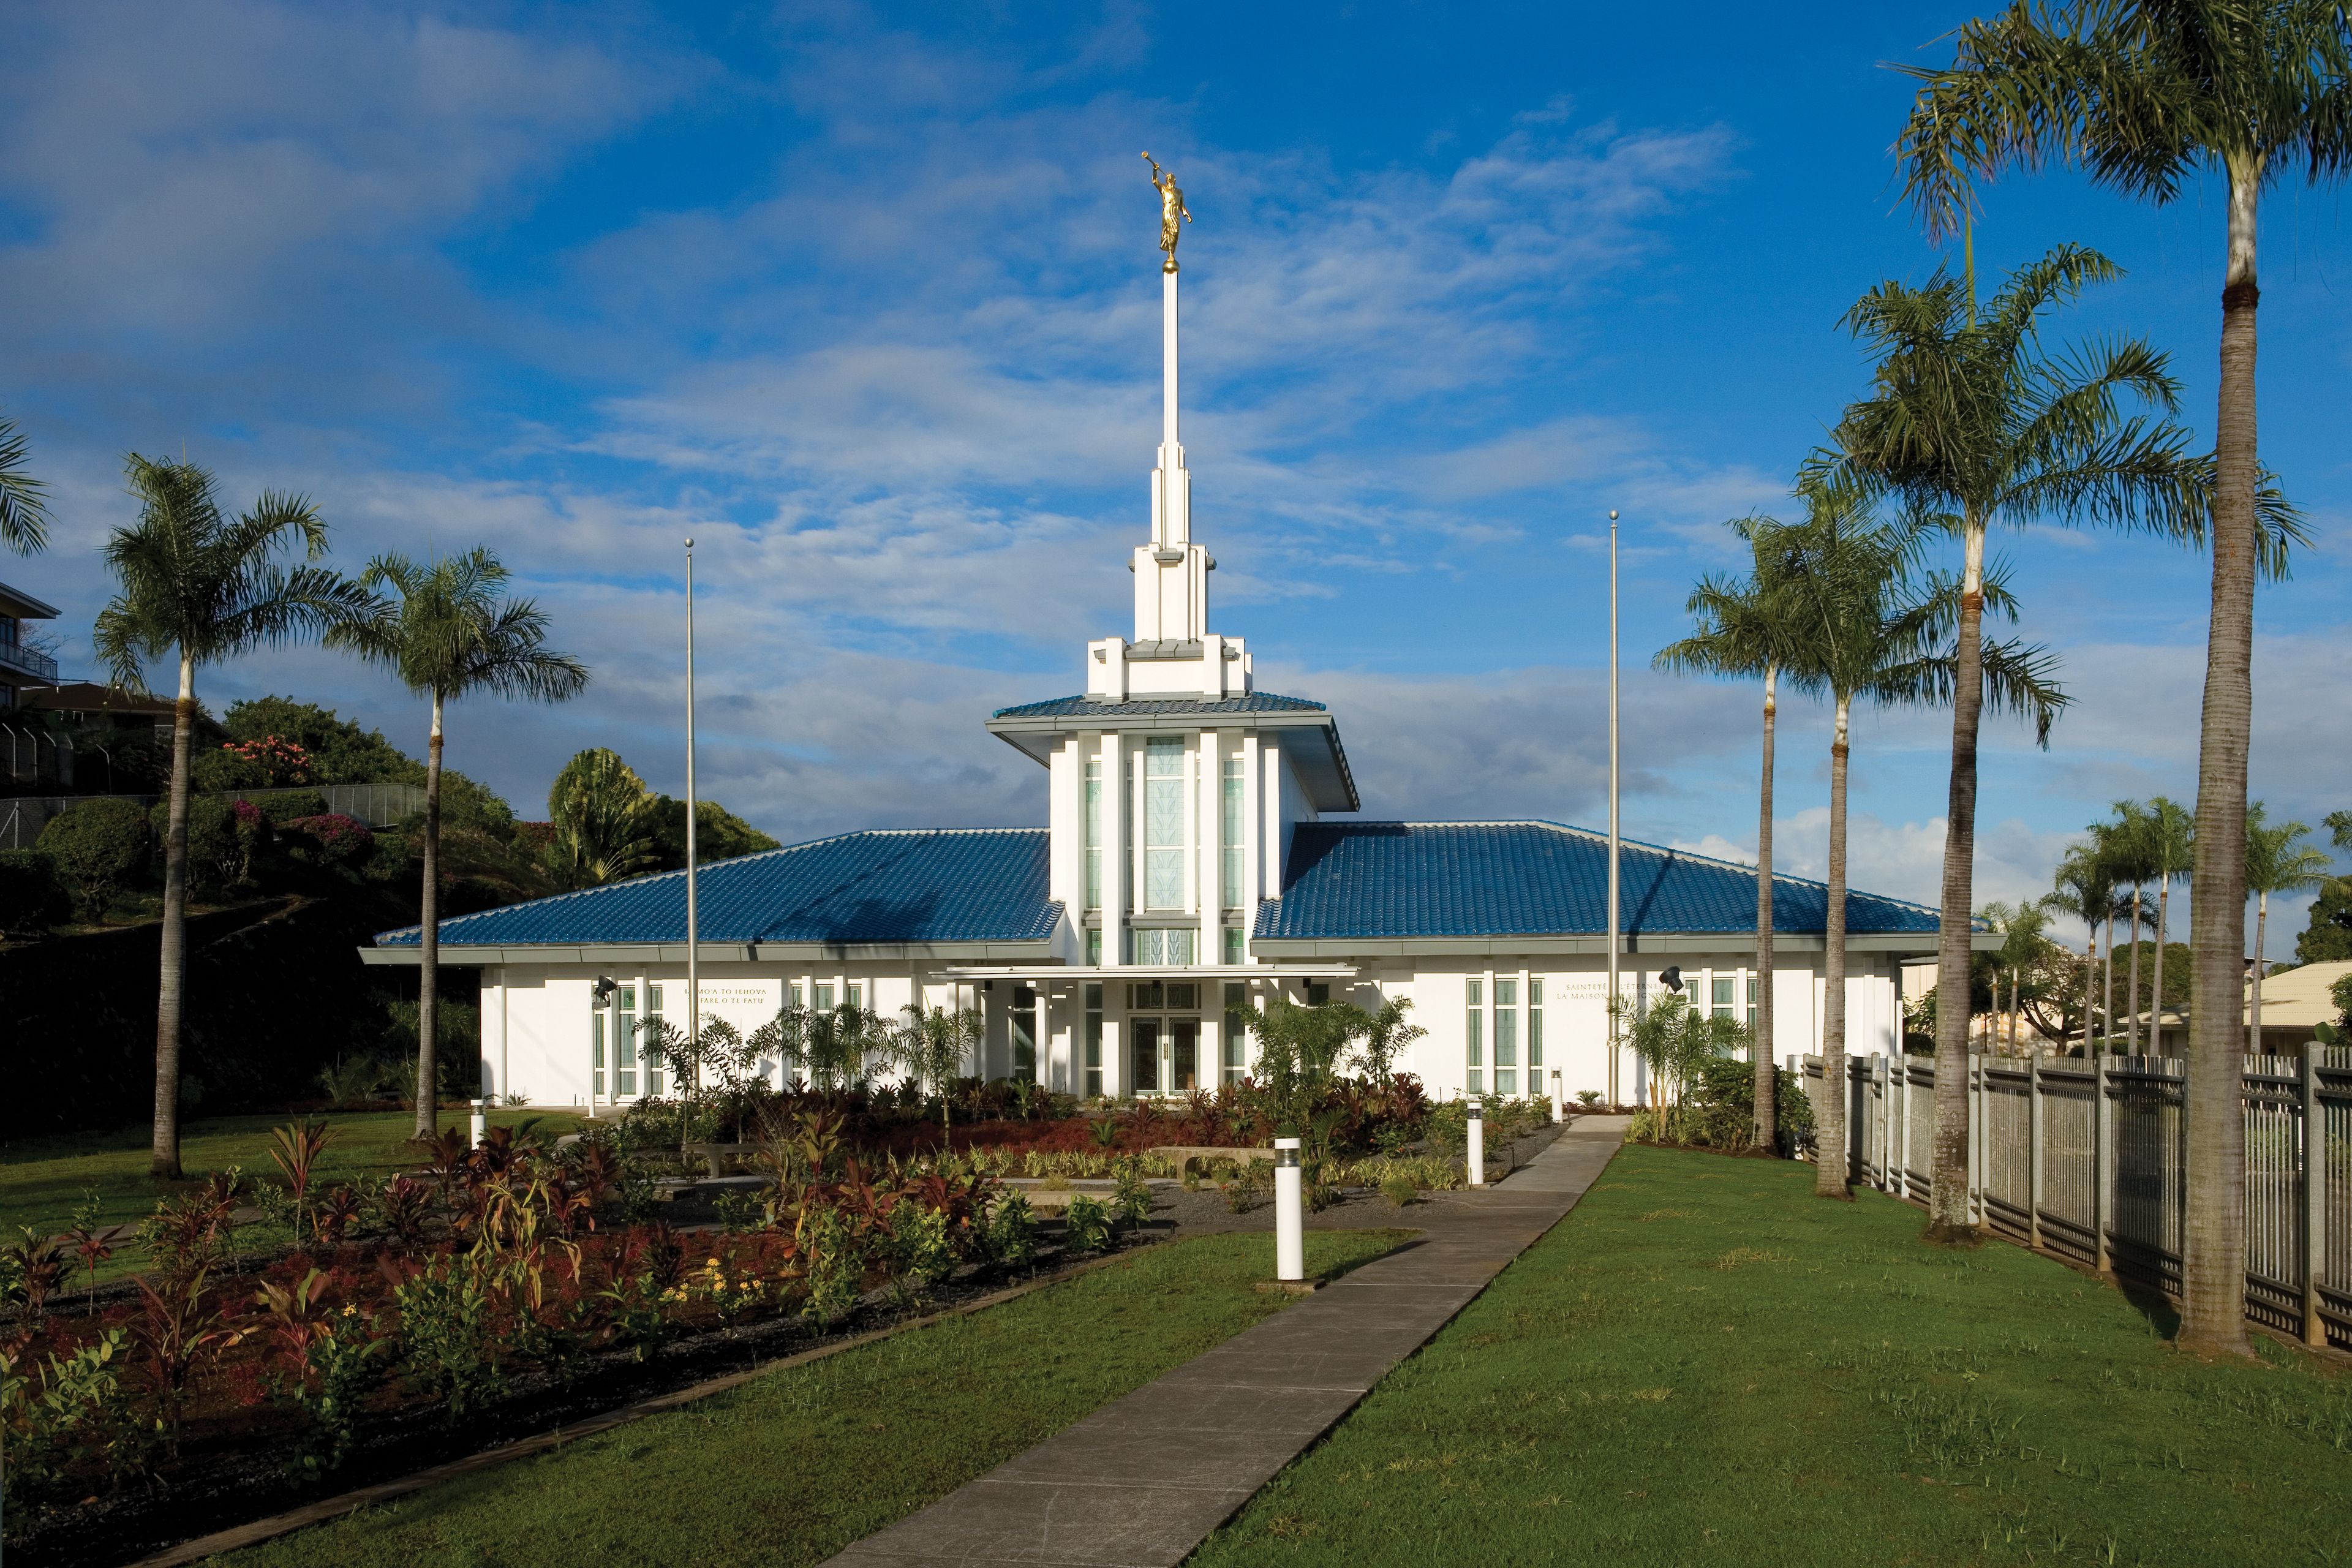 The Papeete Tahiti Temple, including the entrance and scenery.